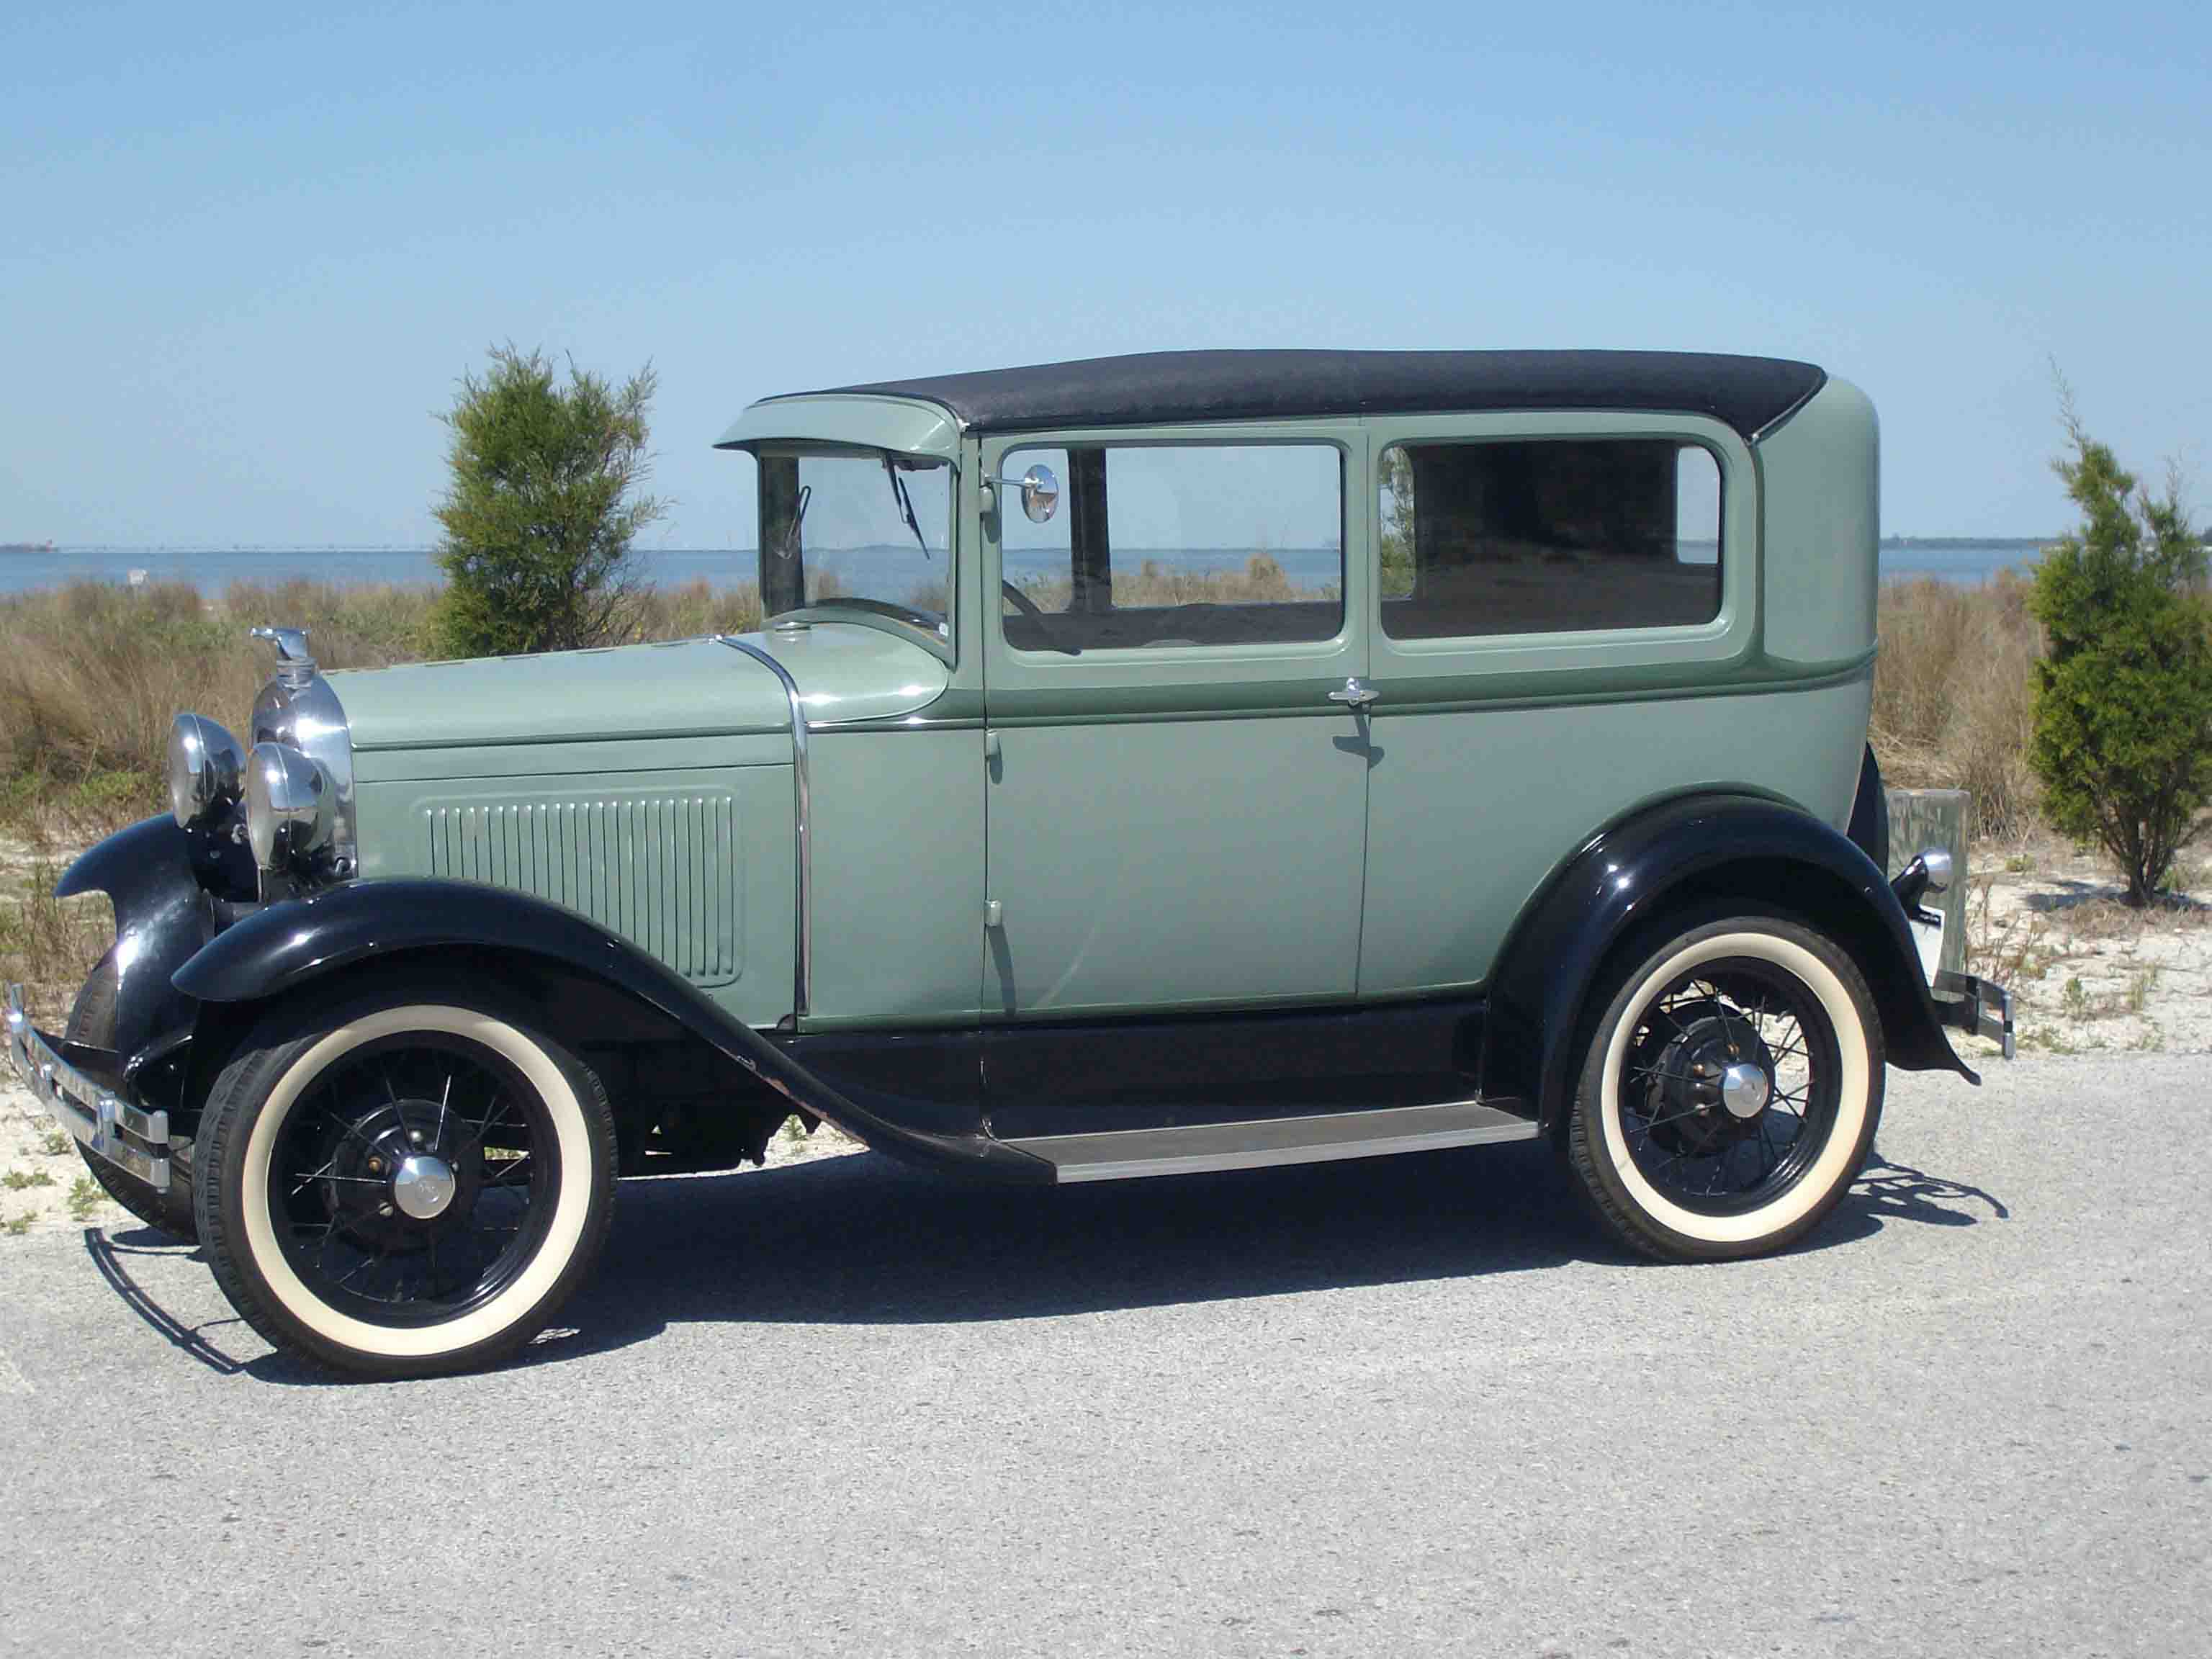 Jerry Kirkers 1932 Chevrolet